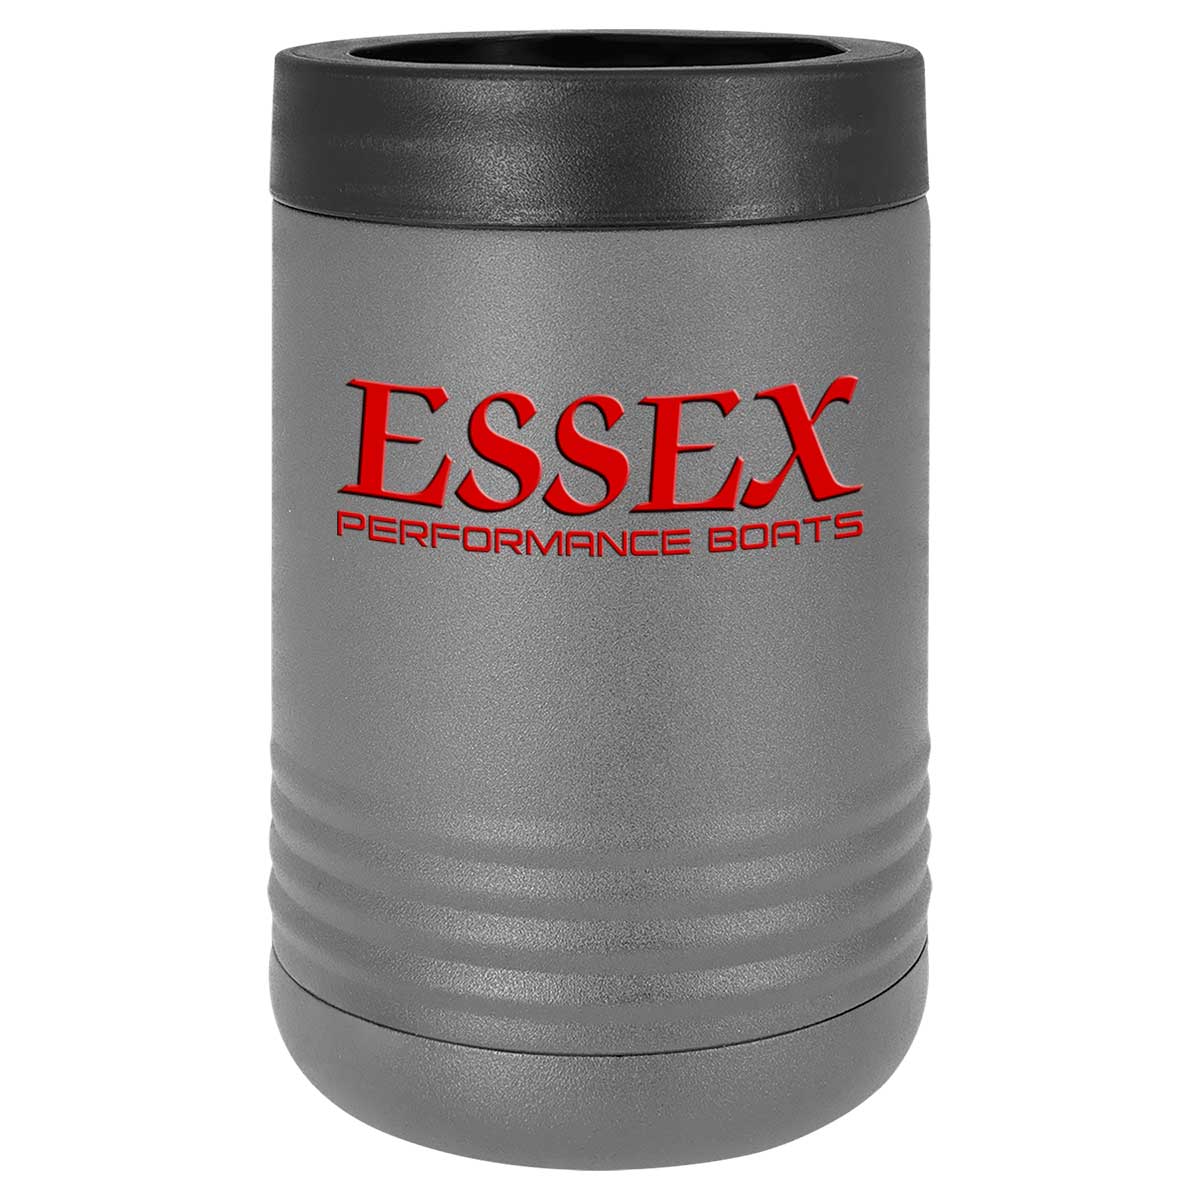 Essex Performance Boats - Vacuum Insulated Beverage Holder